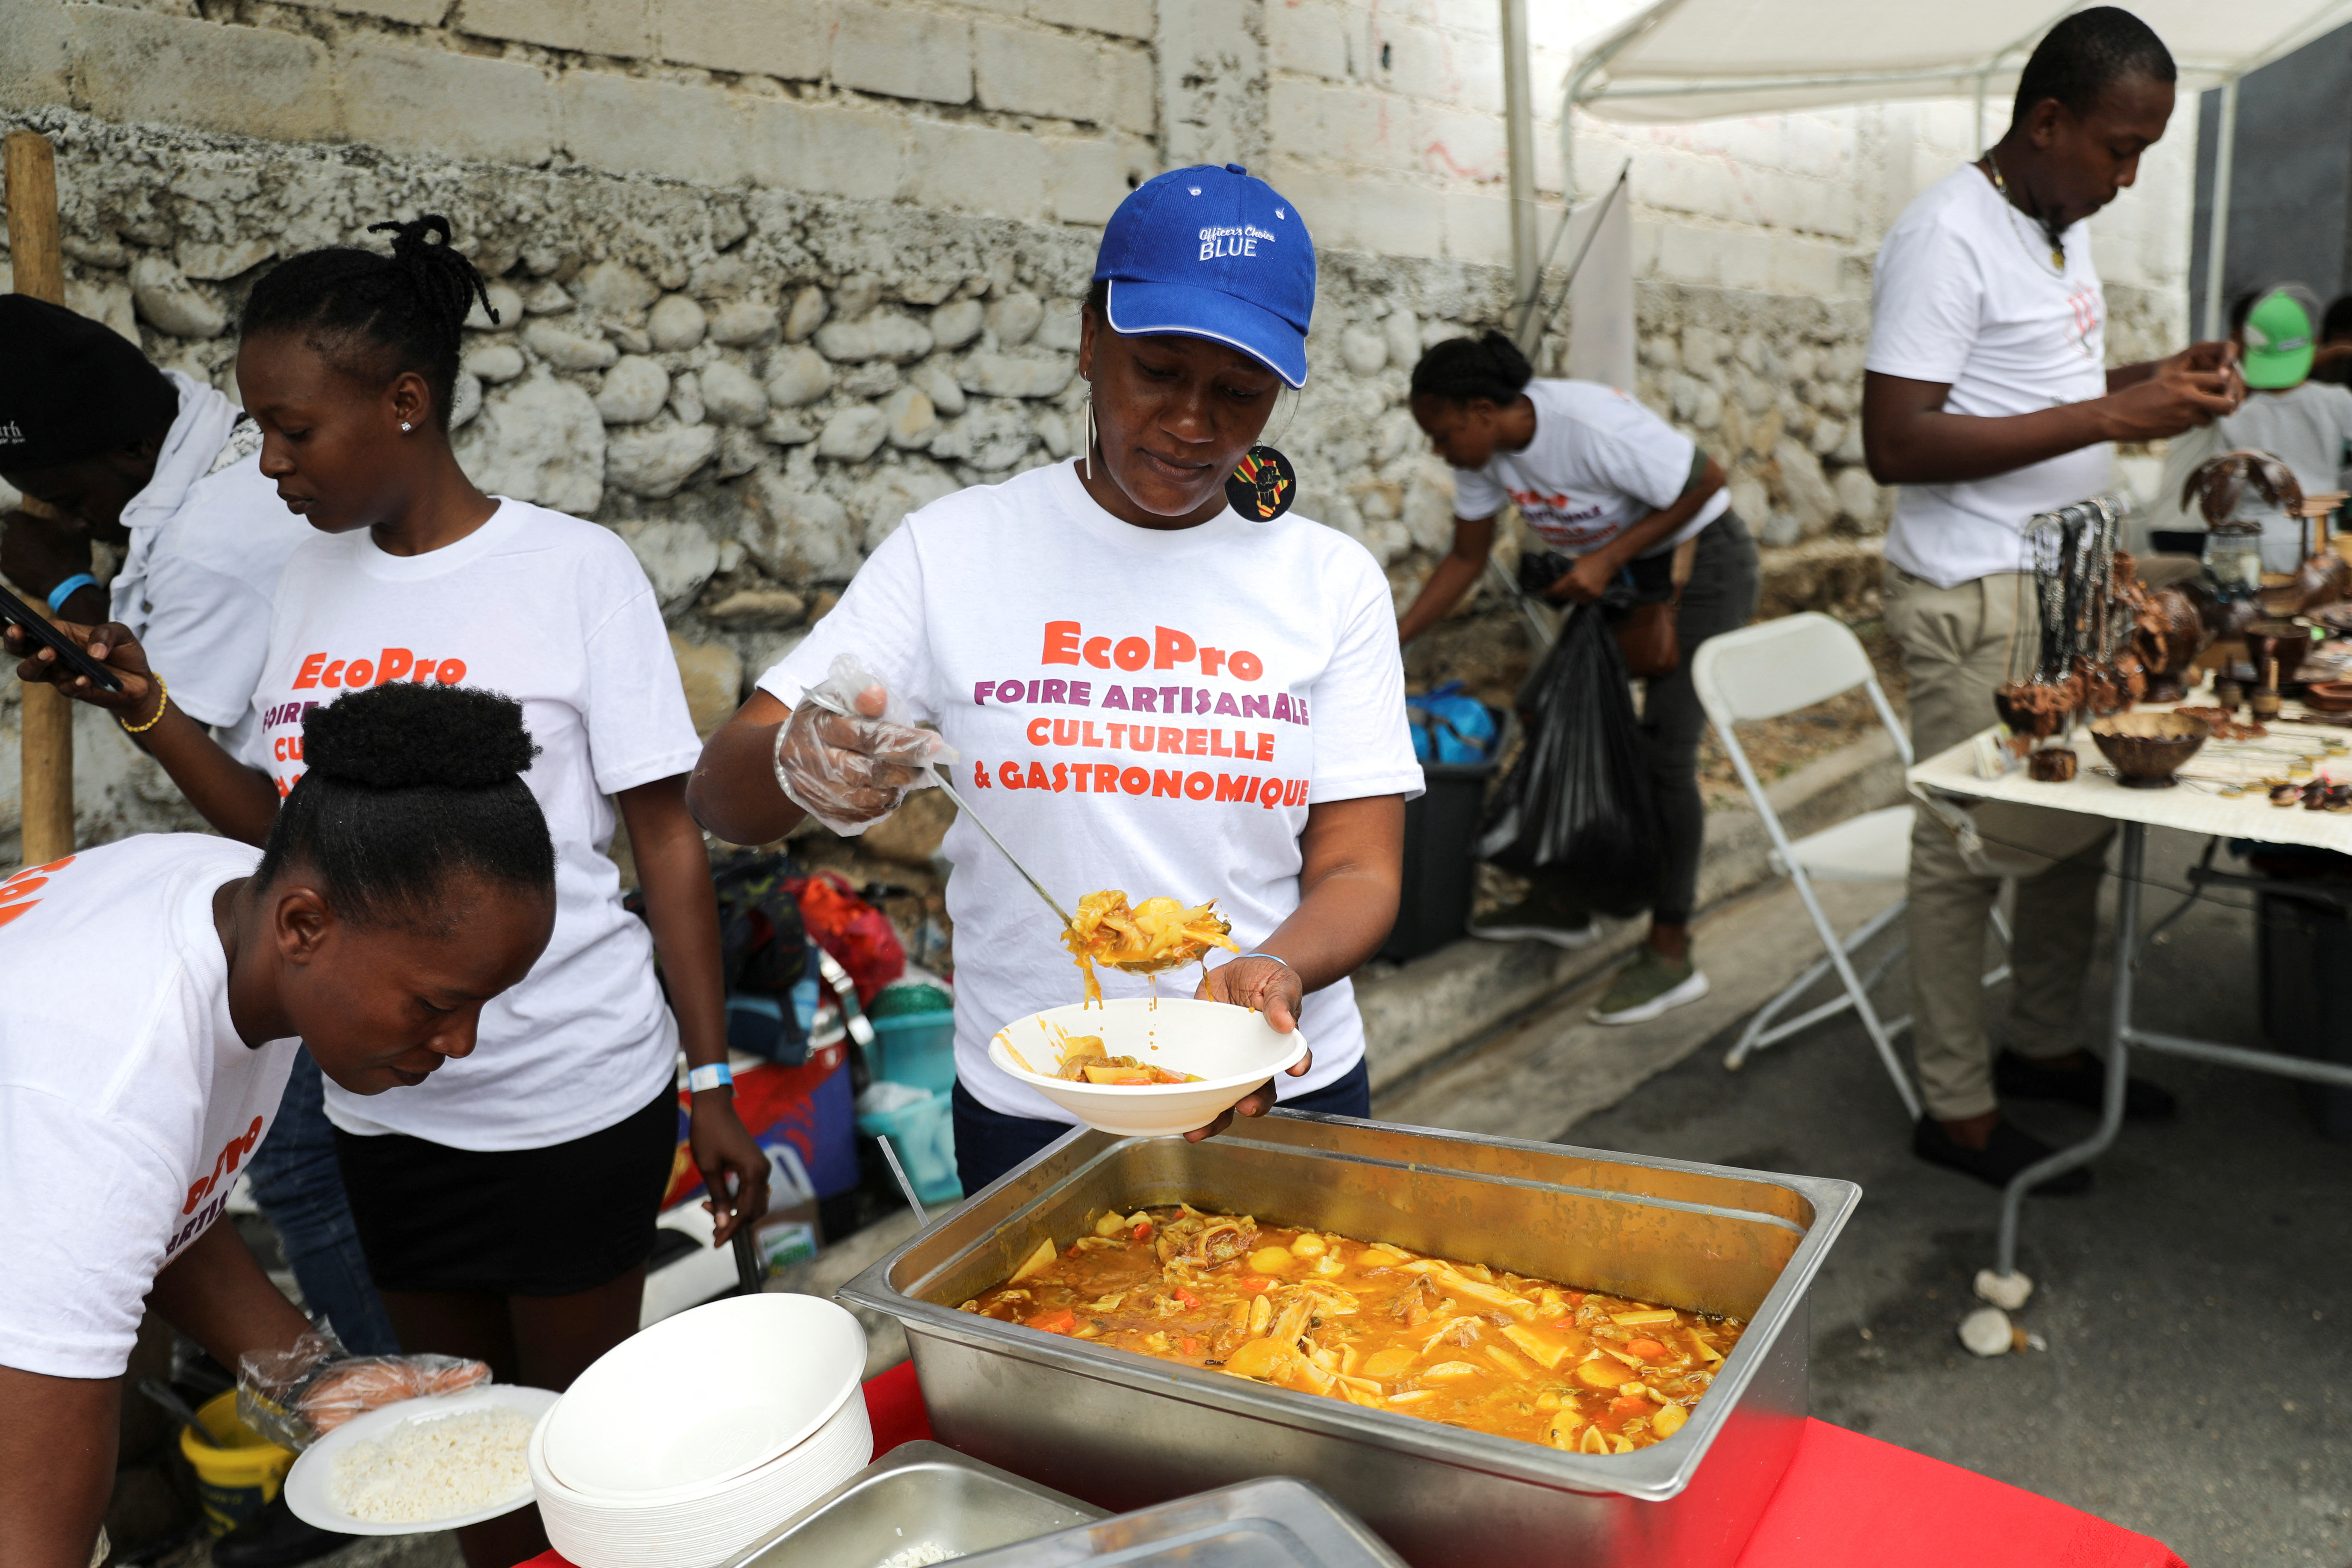 Daily life in Port-au-Prince after Haiti transition council names new leadership